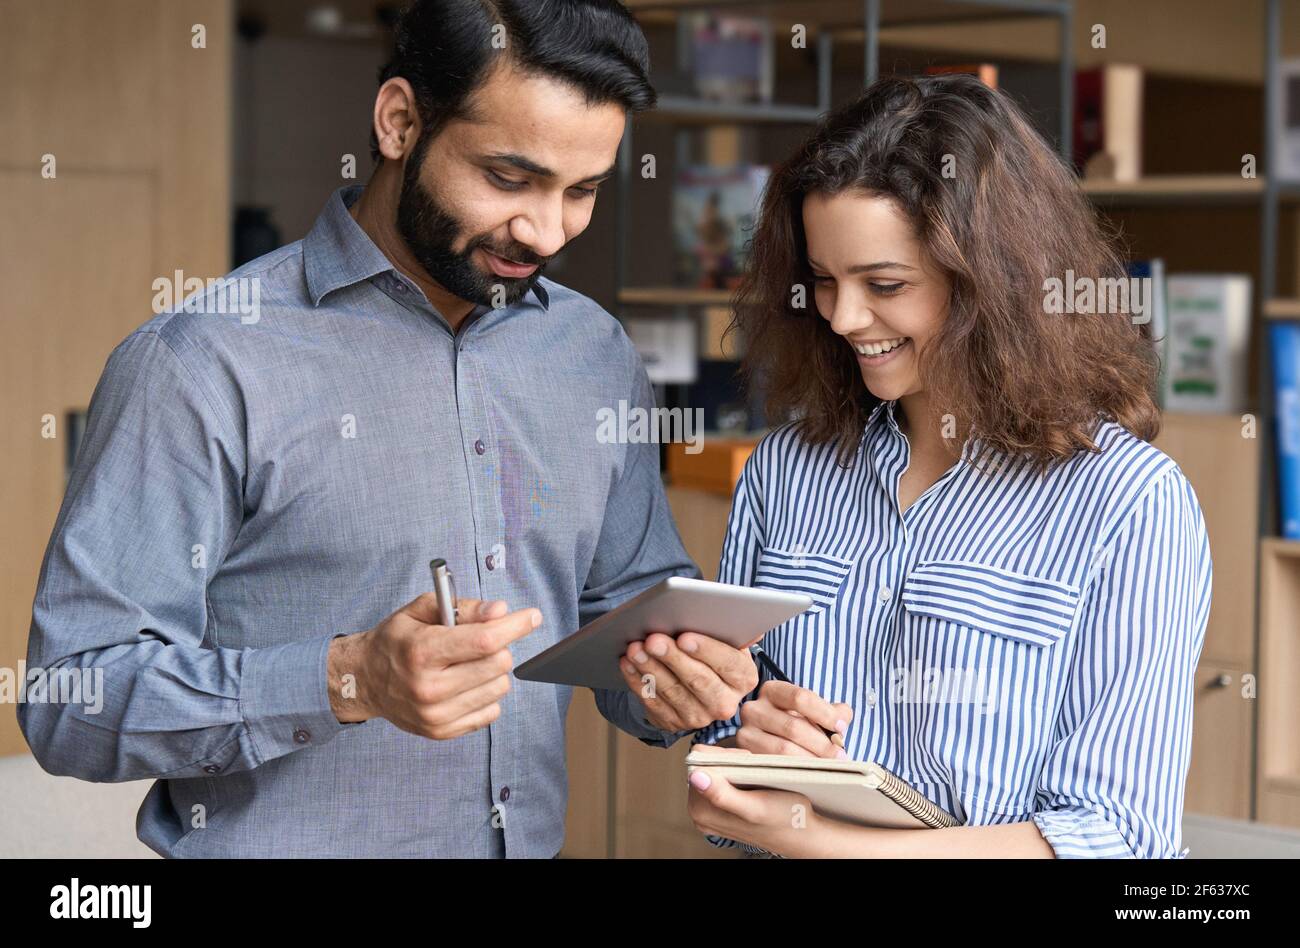 Indian and hispanic happy colleagues talking using digital tablet in office. Stock Photo